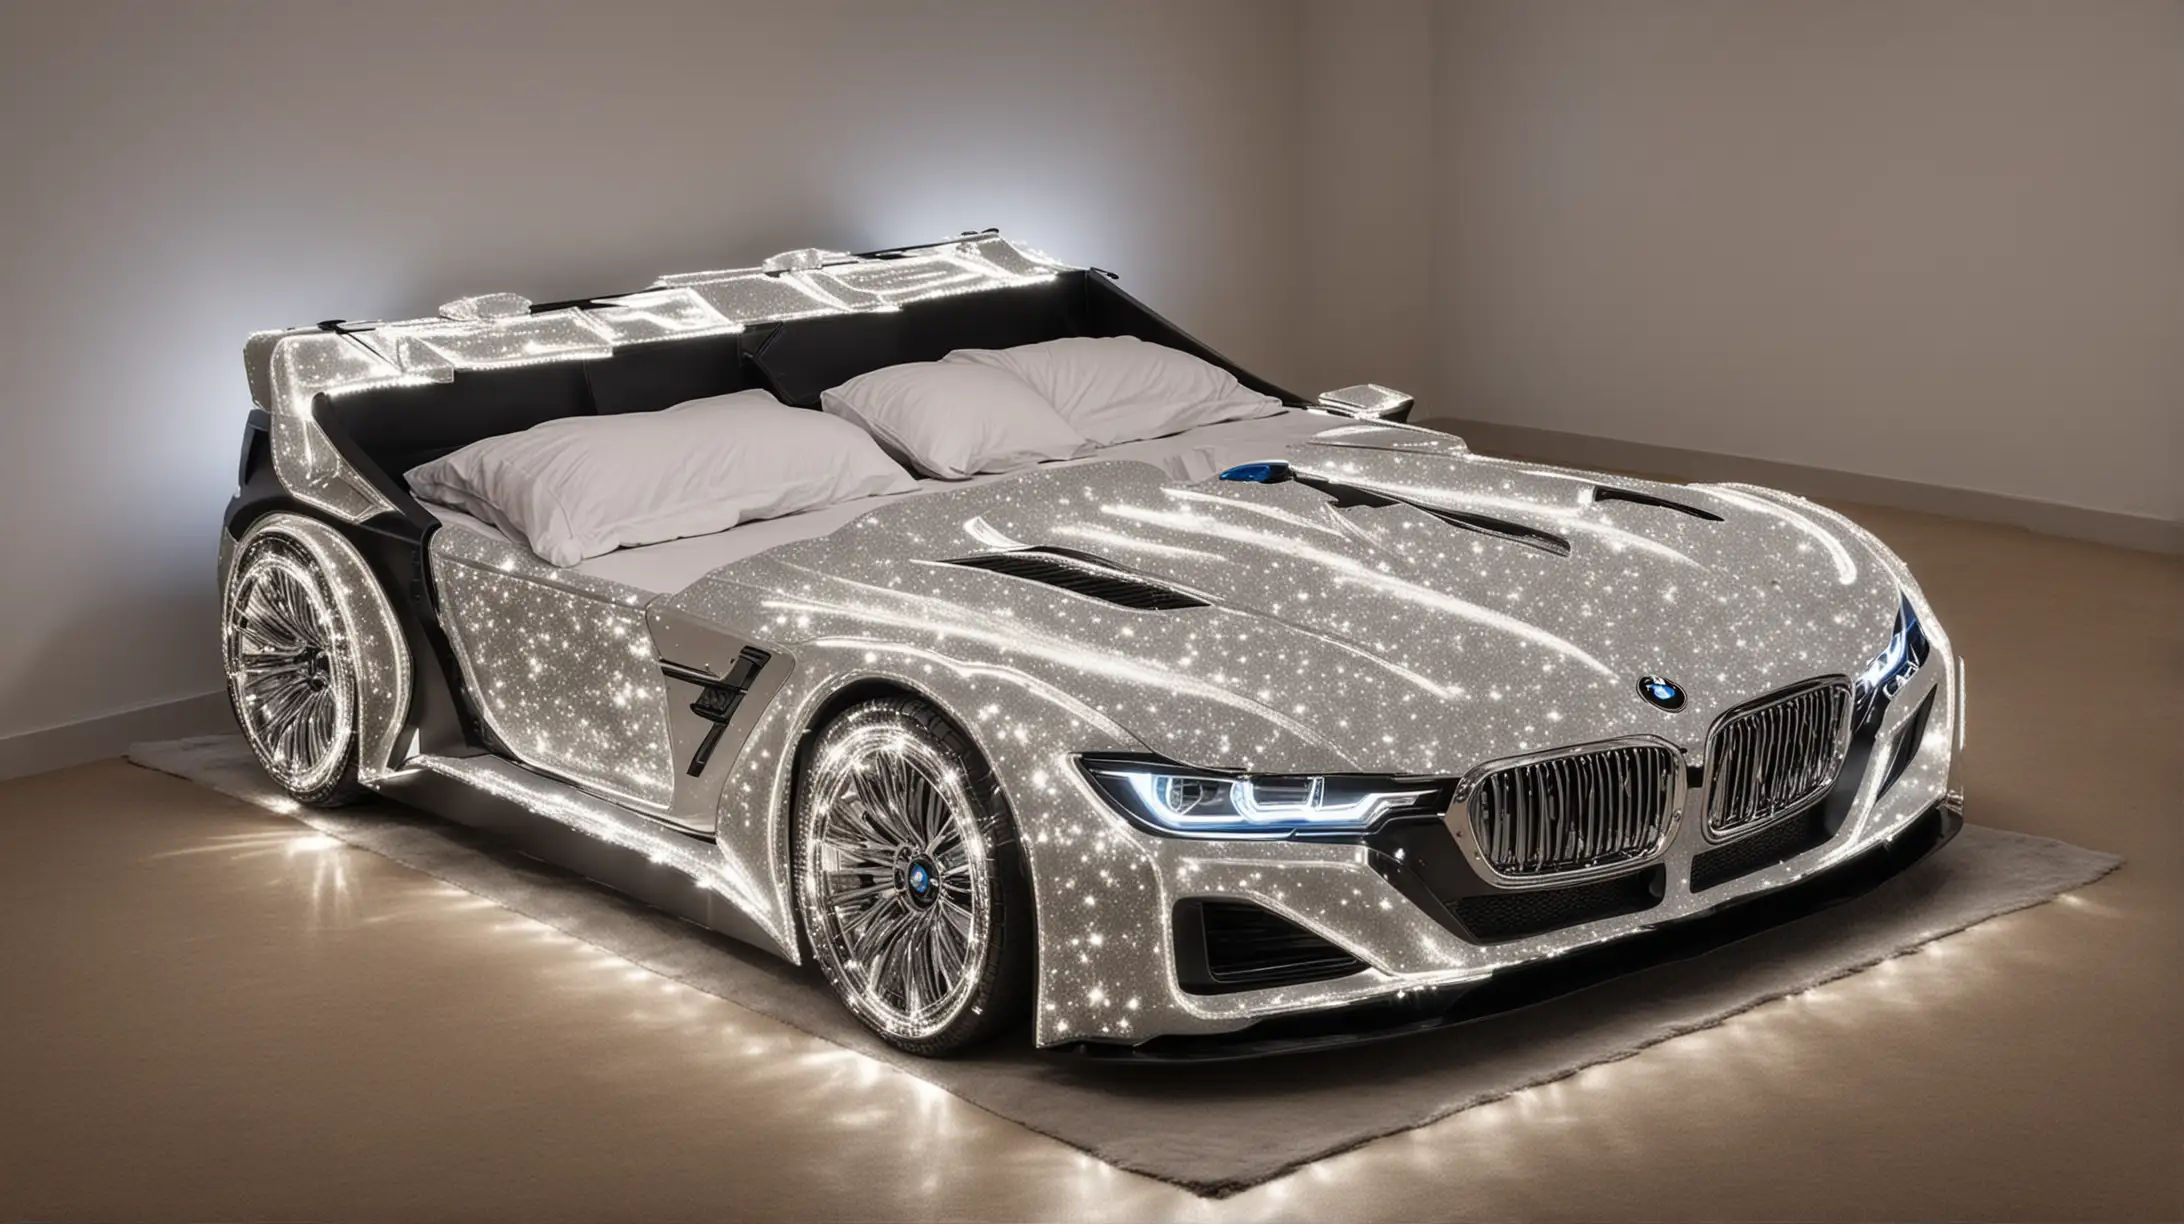 Double bed in the shape of a BMW car with headlights on and sparkle graphics